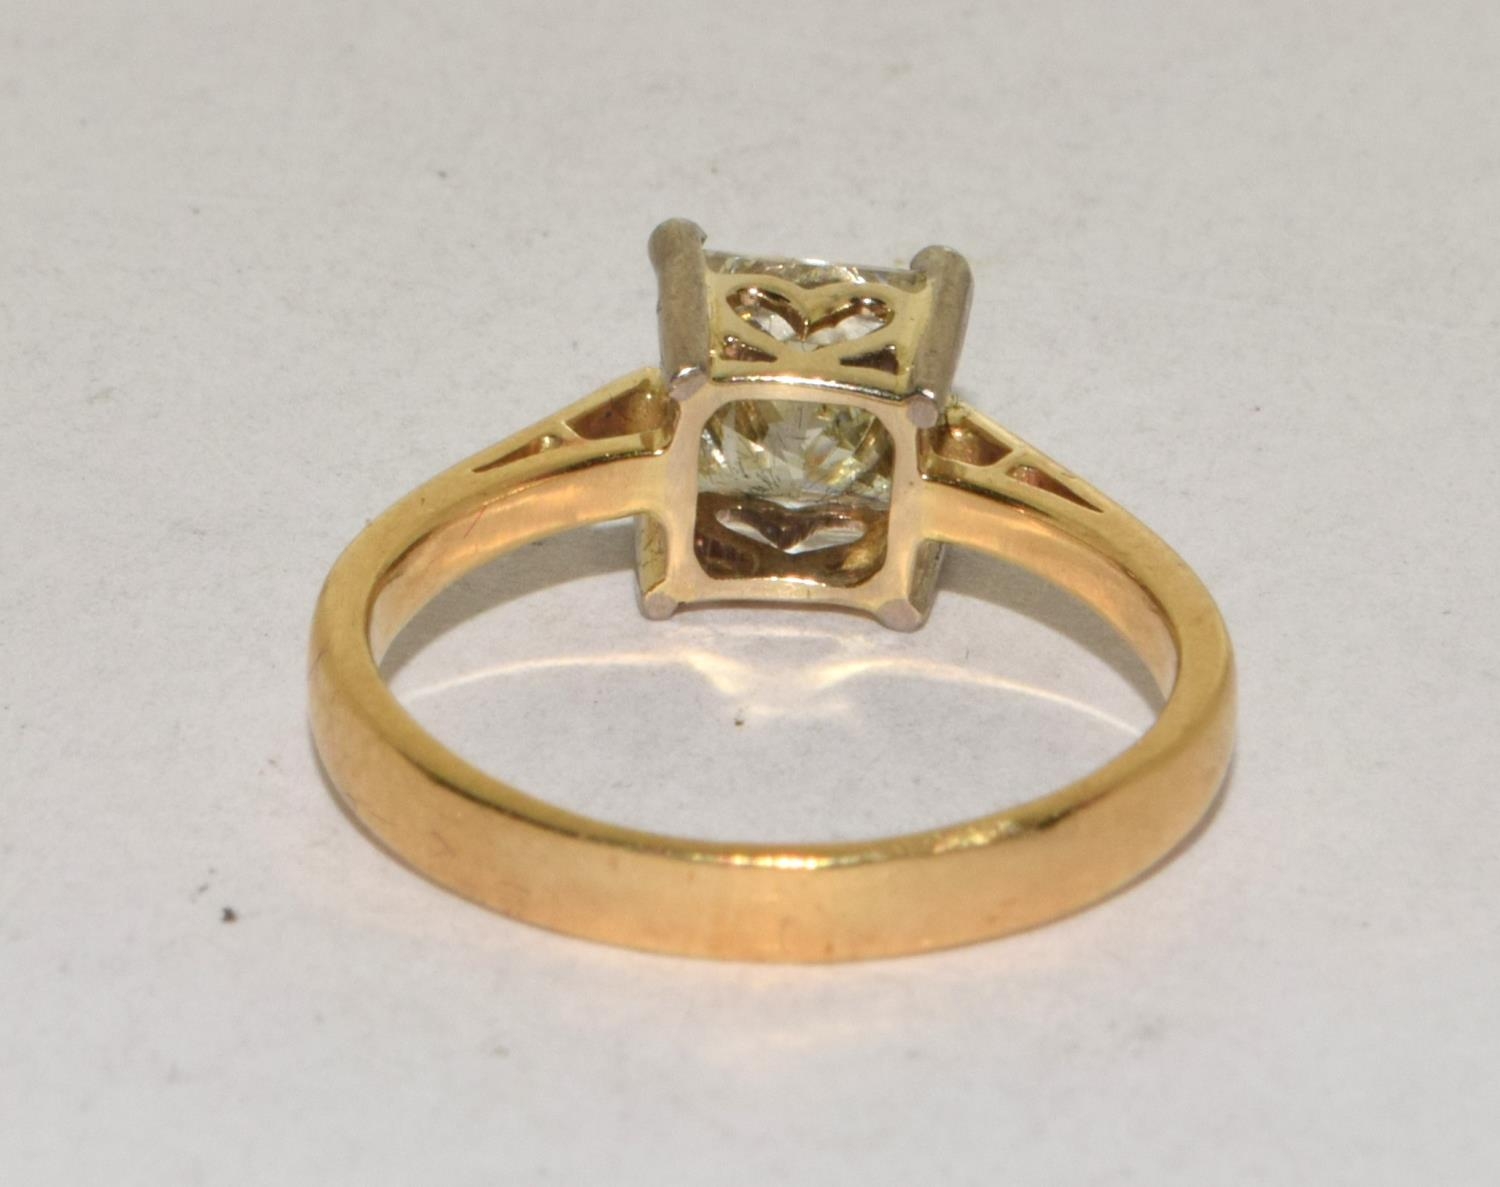 Superb 18ct yellow gold ladies Diamond solitaire ring set as a Princess Cut Diamond of approx 1. - Image 3 of 5